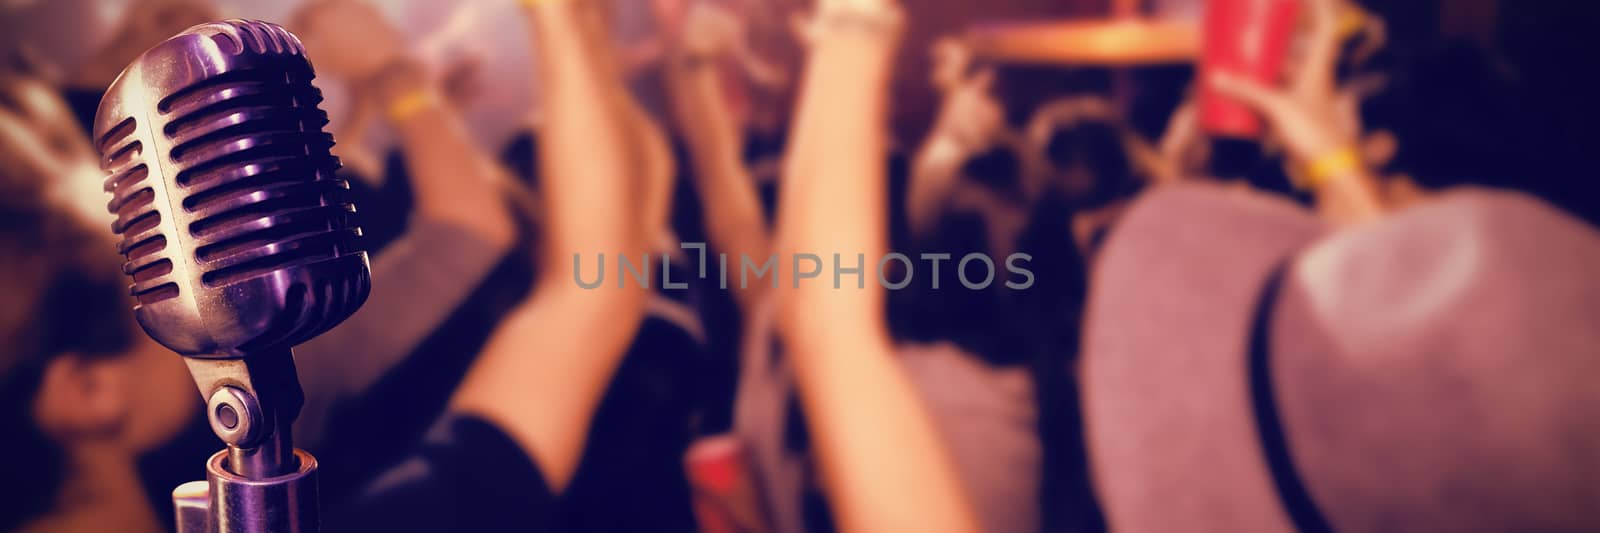 Close-up of microphone  against people with arms raised at nightclub